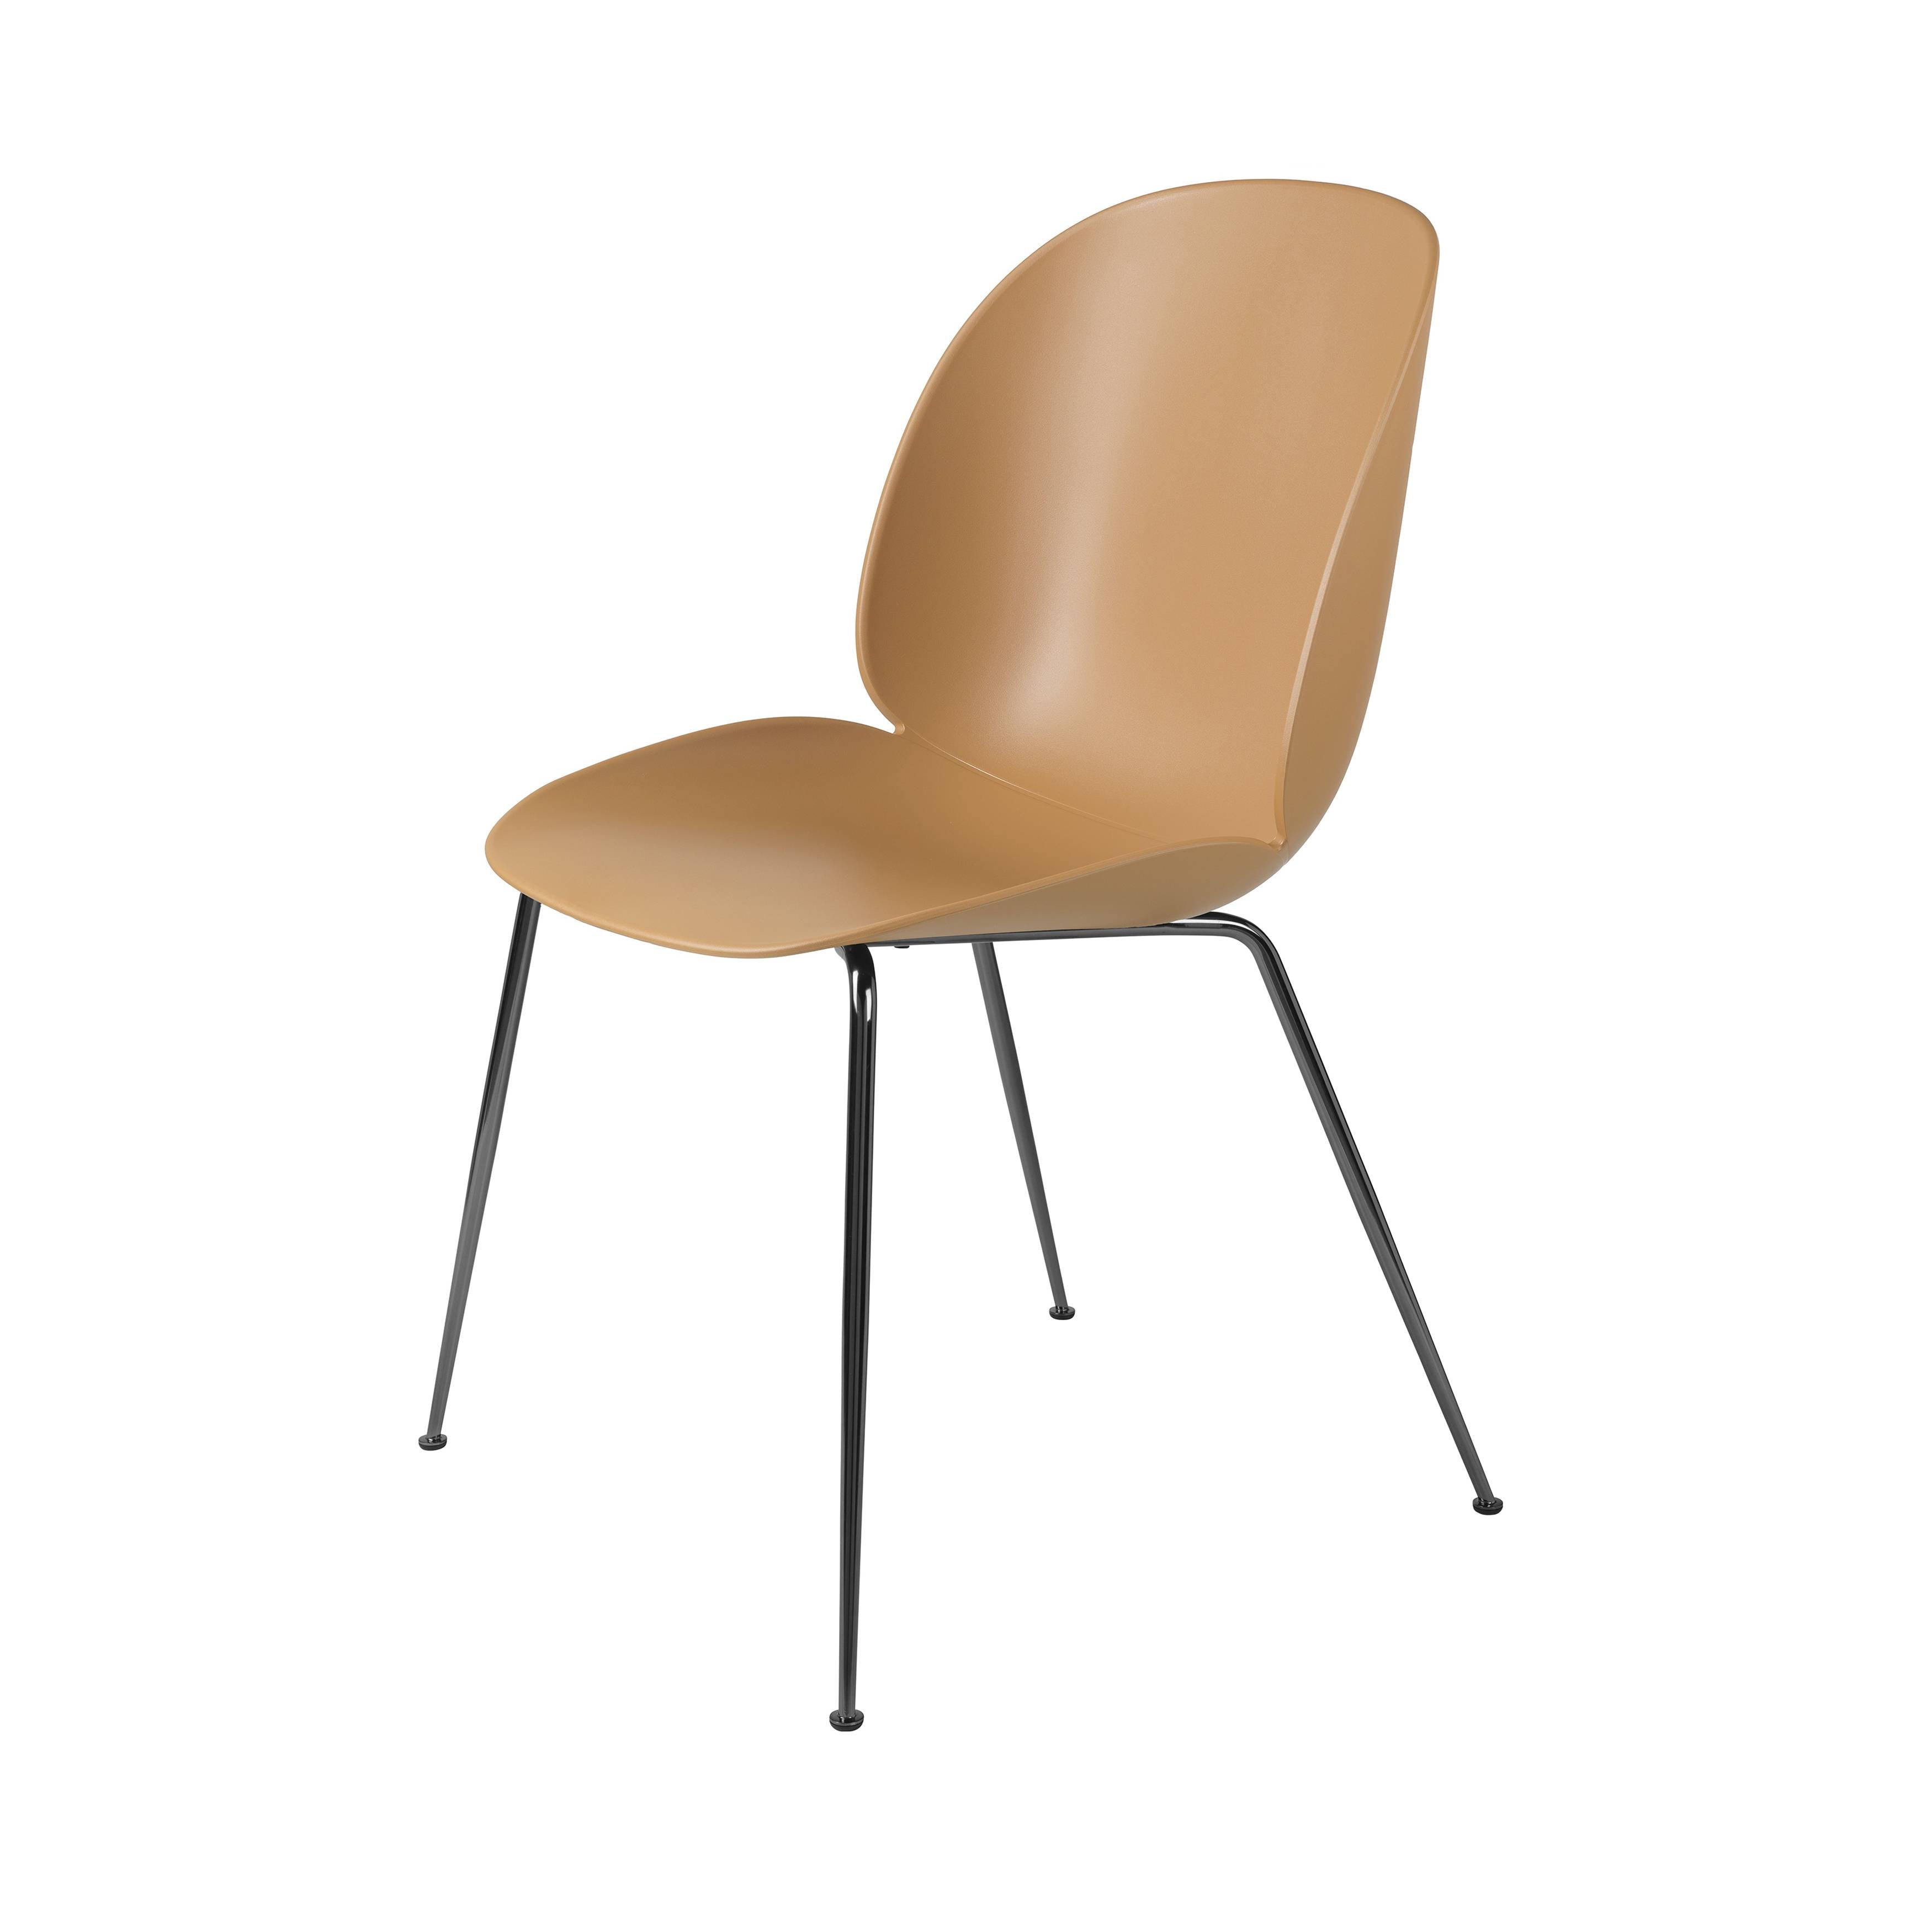 Beetle Dining Chair: Conic Base  + Amber Brown + Black Chrome +  Felt Glides